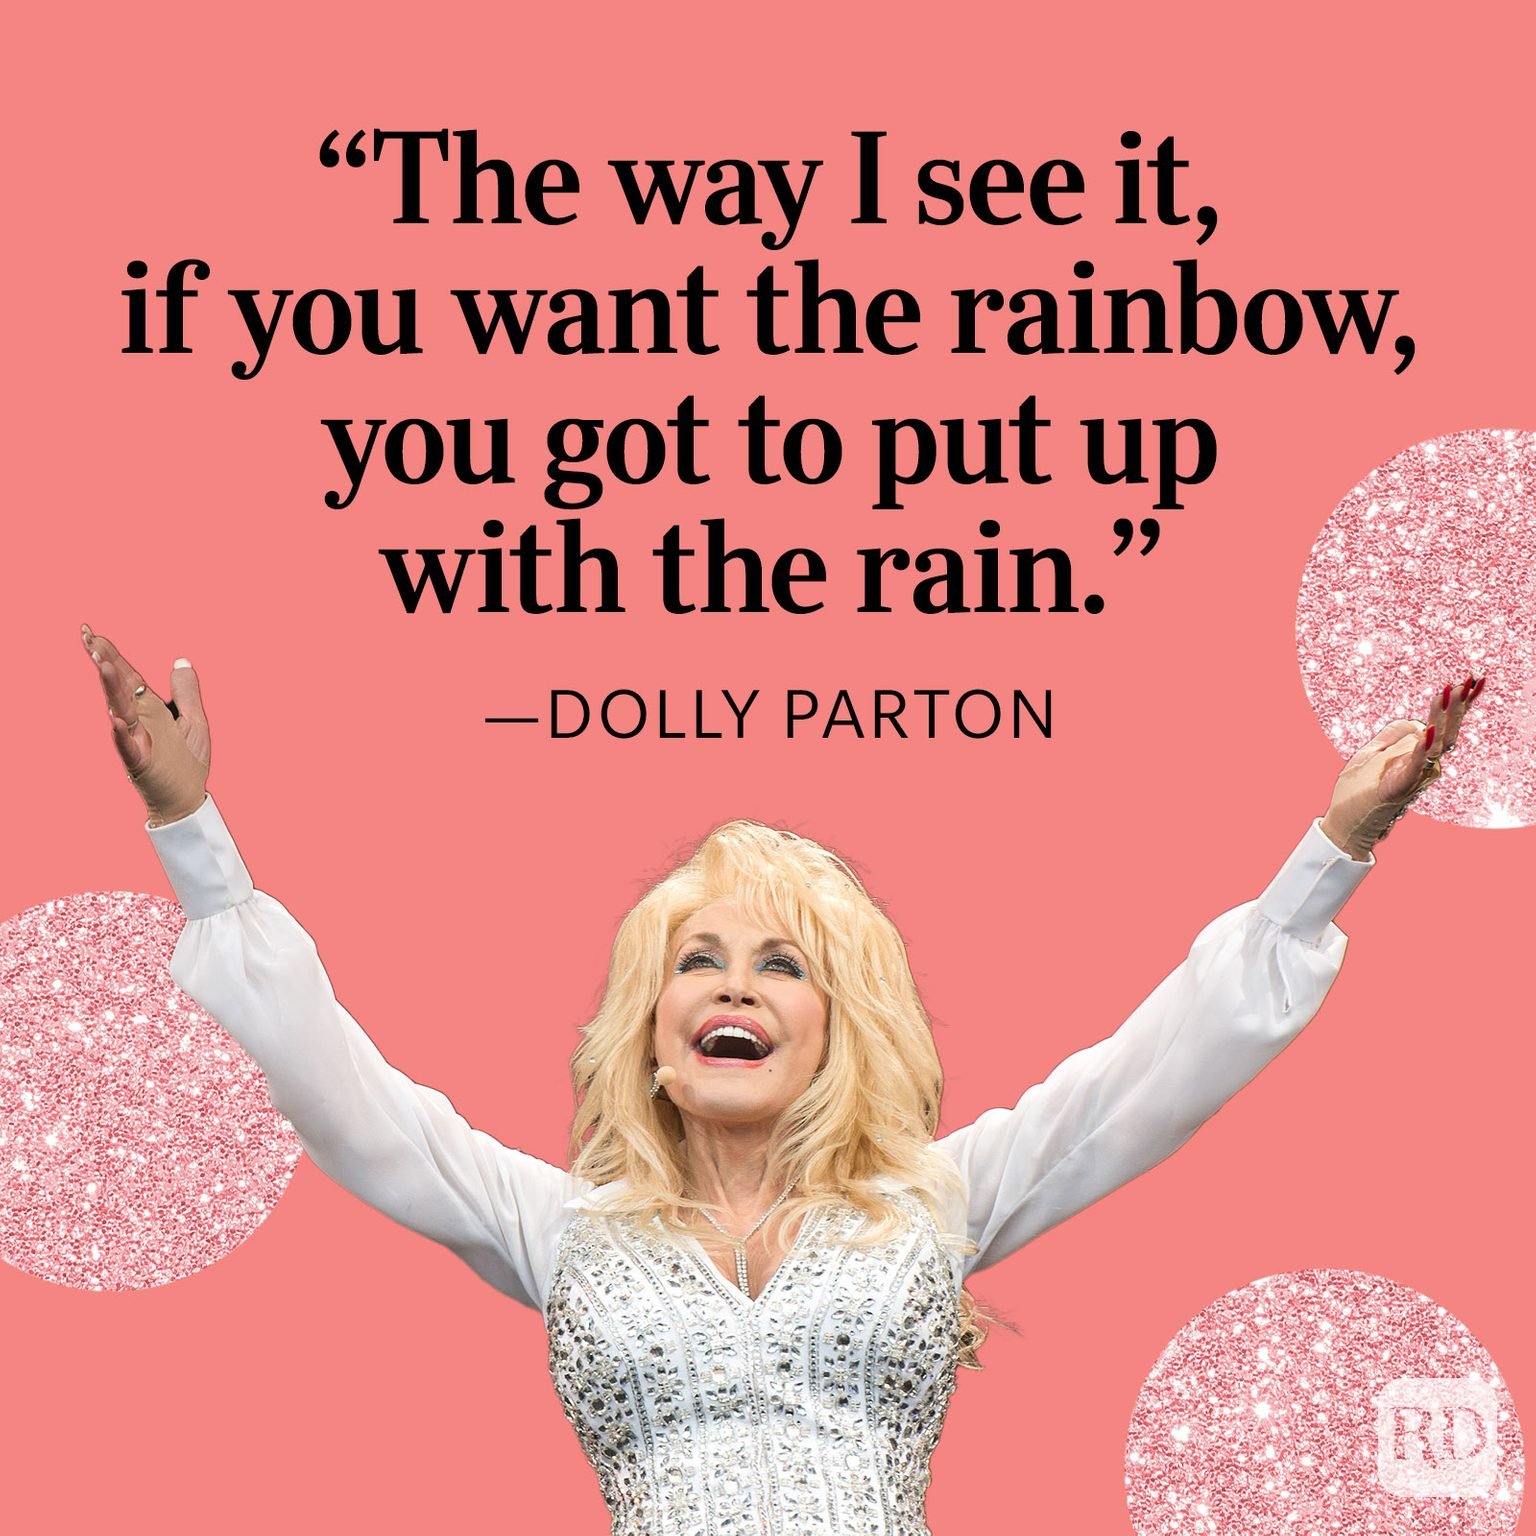 Dolly Parton Quotes Her Funniest And Most Inspiring Sayings Trusted Since 1922